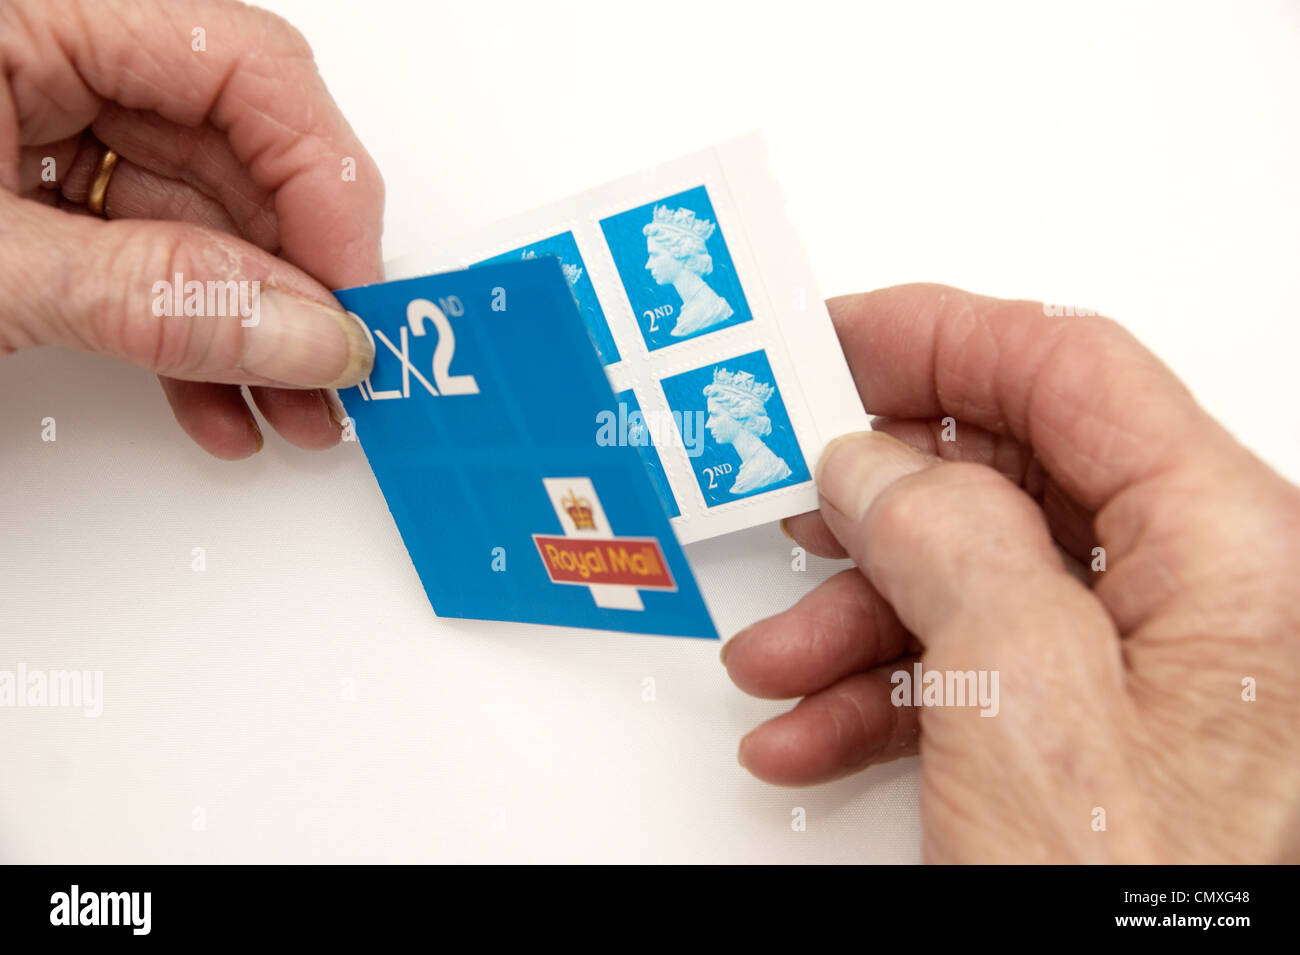 Elderly woman holding a book of 2nd second class stamps Stock Photo